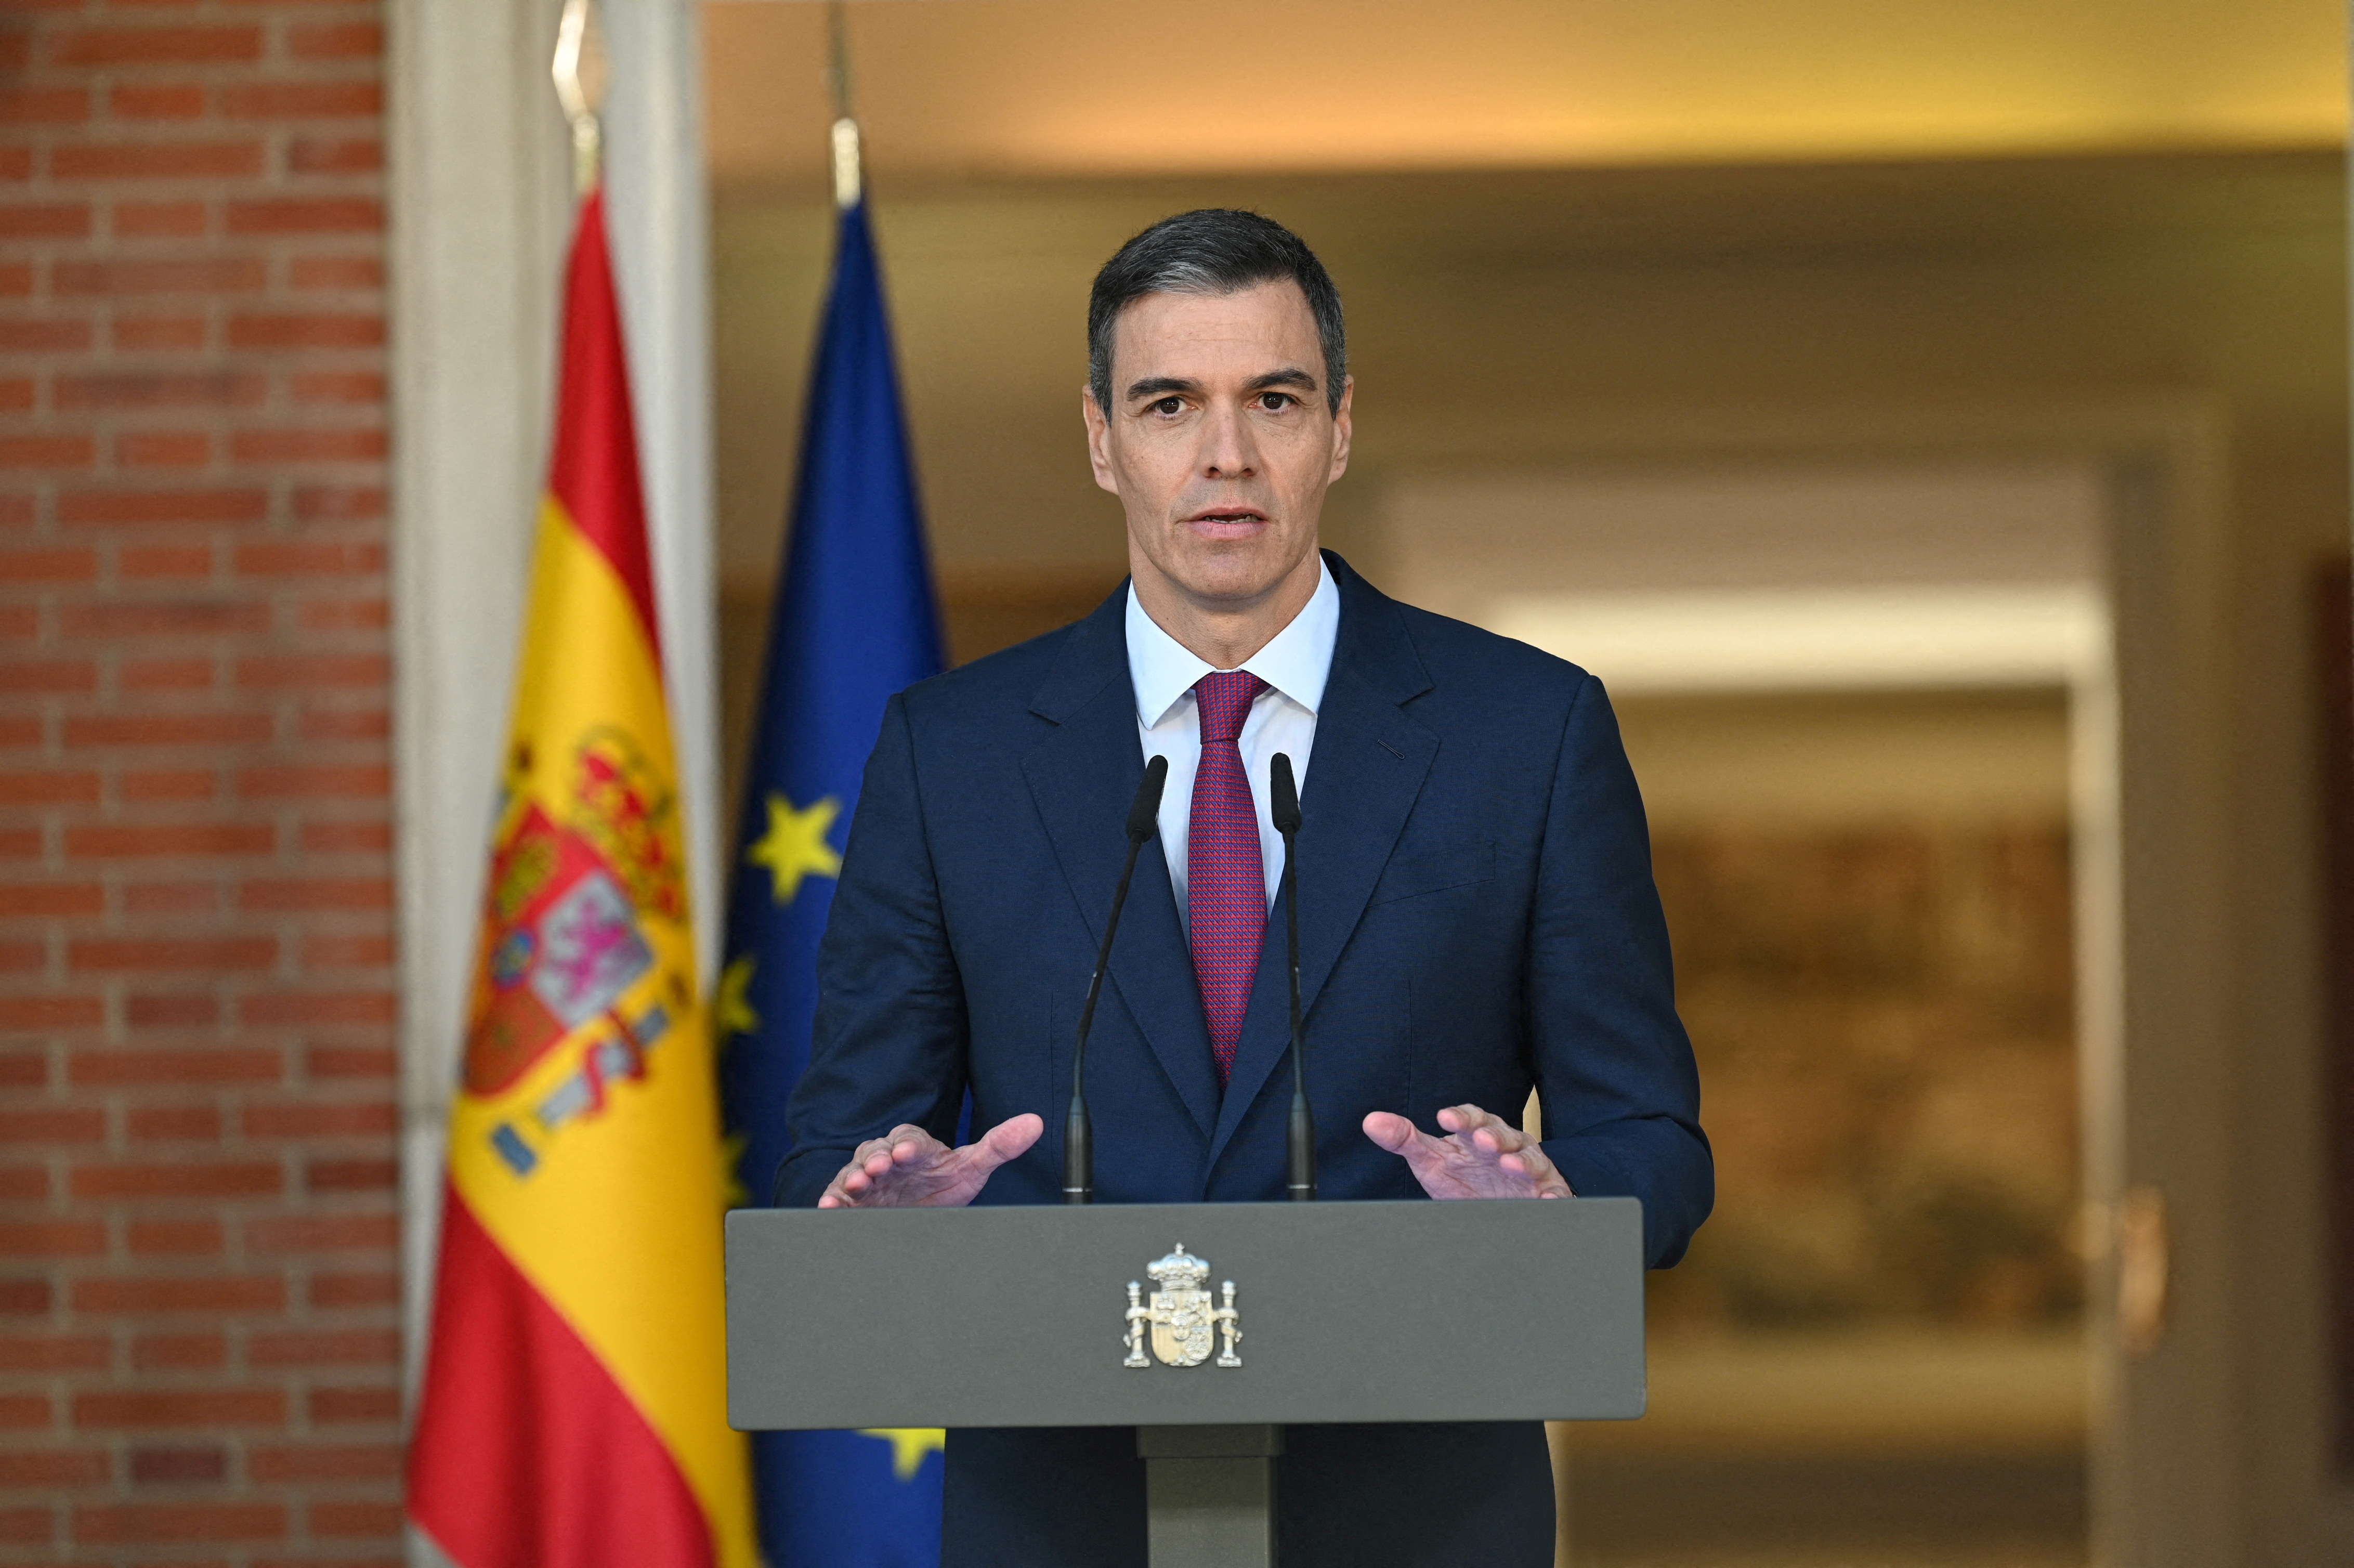 Pedro Sanchez stays on as Spain's prime minister after weighing exit